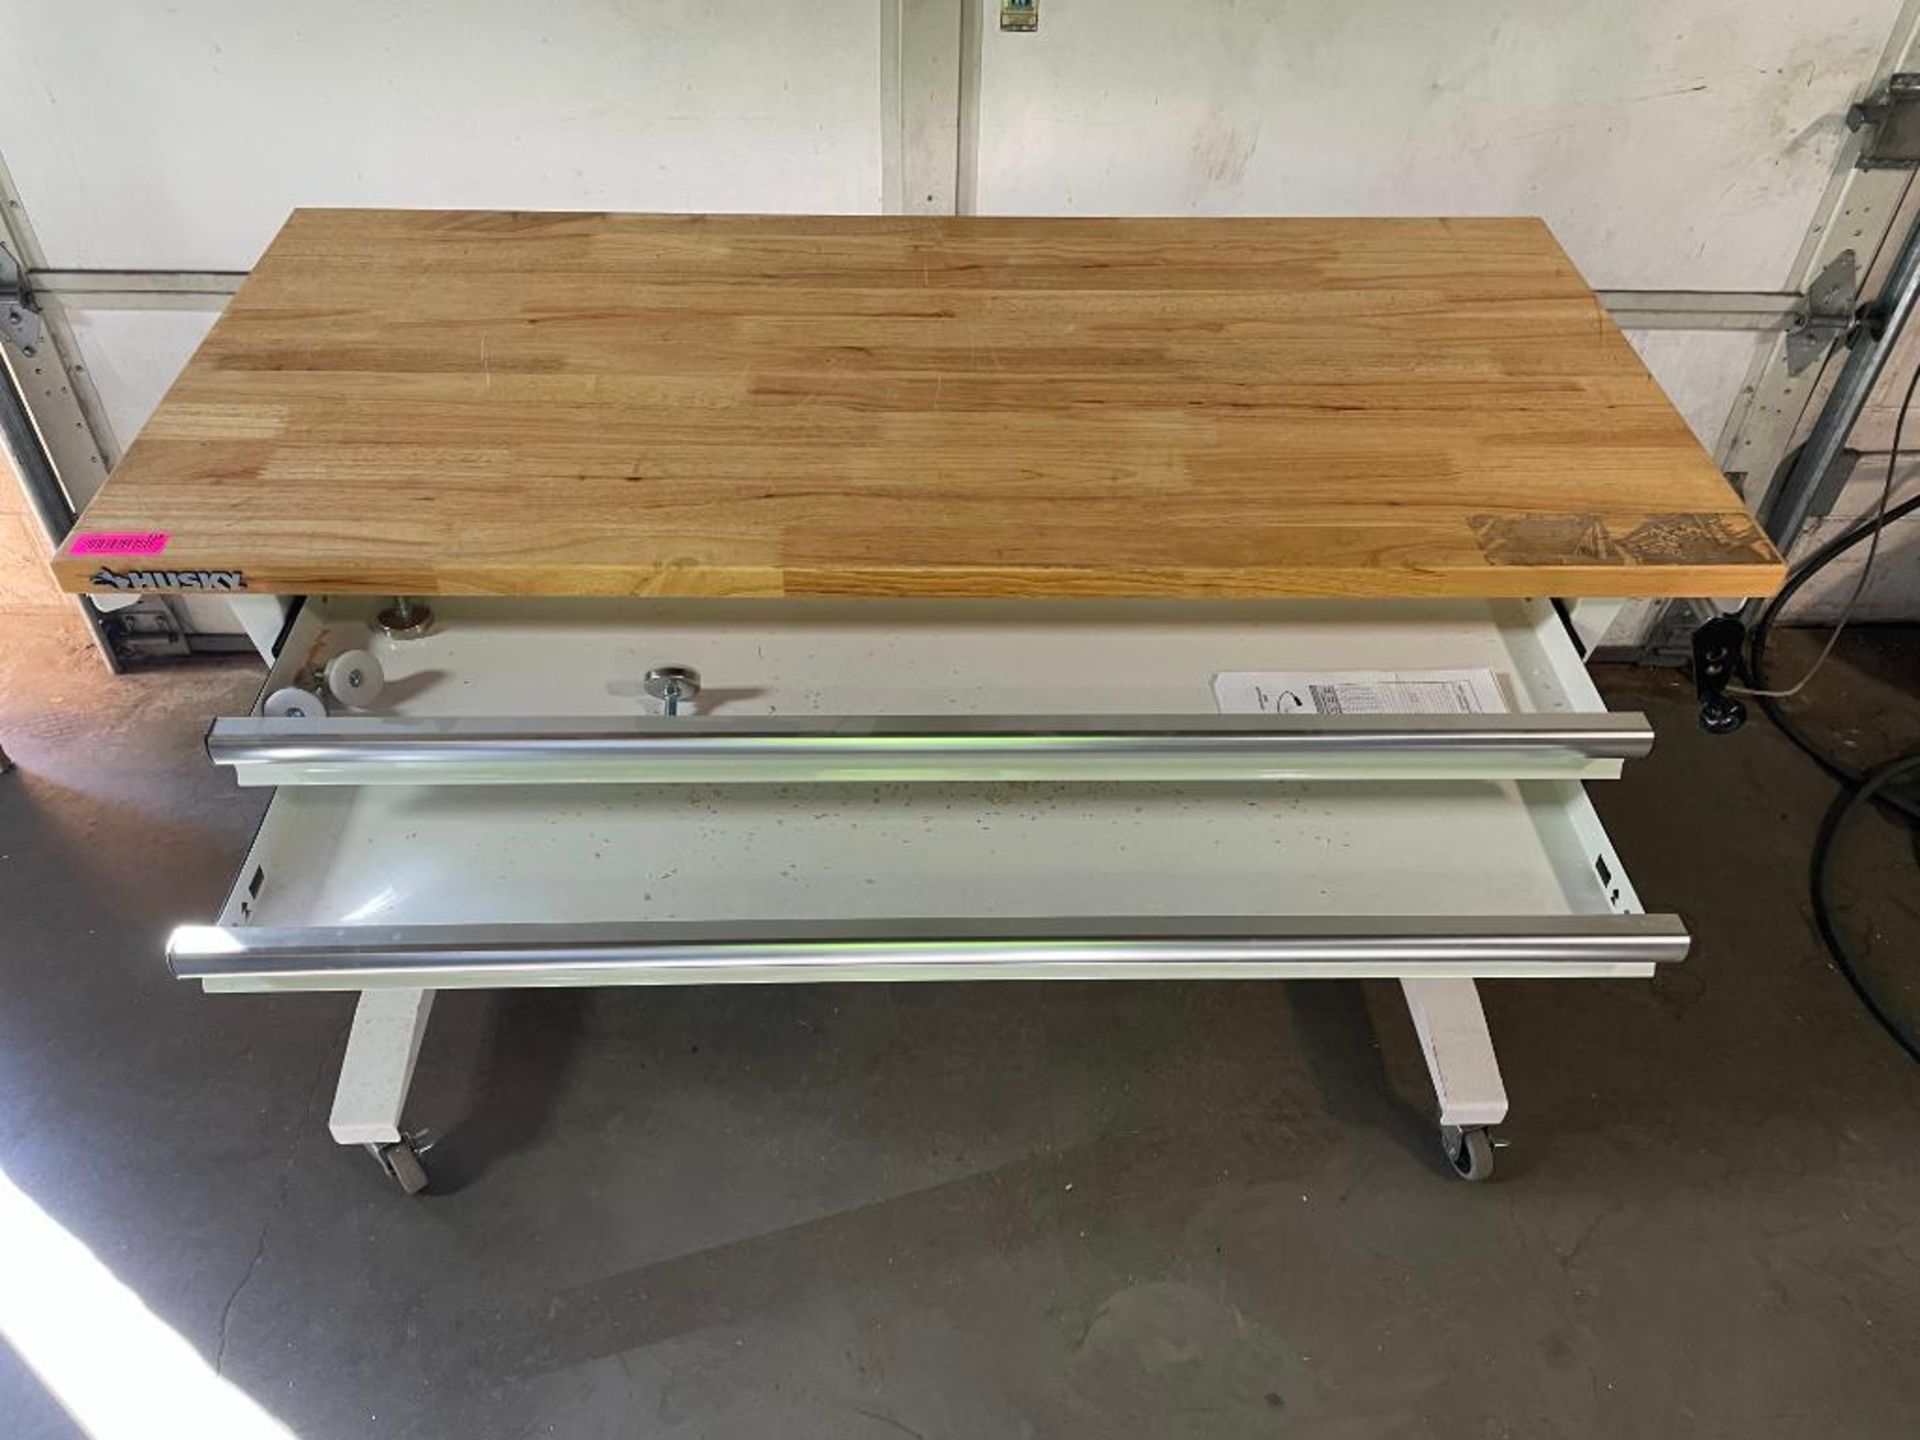 52" ADJUSTABLE HEIGHT WORKBENCH TABLE W/ 2-DRAWERS IN WHITE BRAND/MODEL: HUSKY SIZE: 52" X 24" QTY: - Image 4 of 7